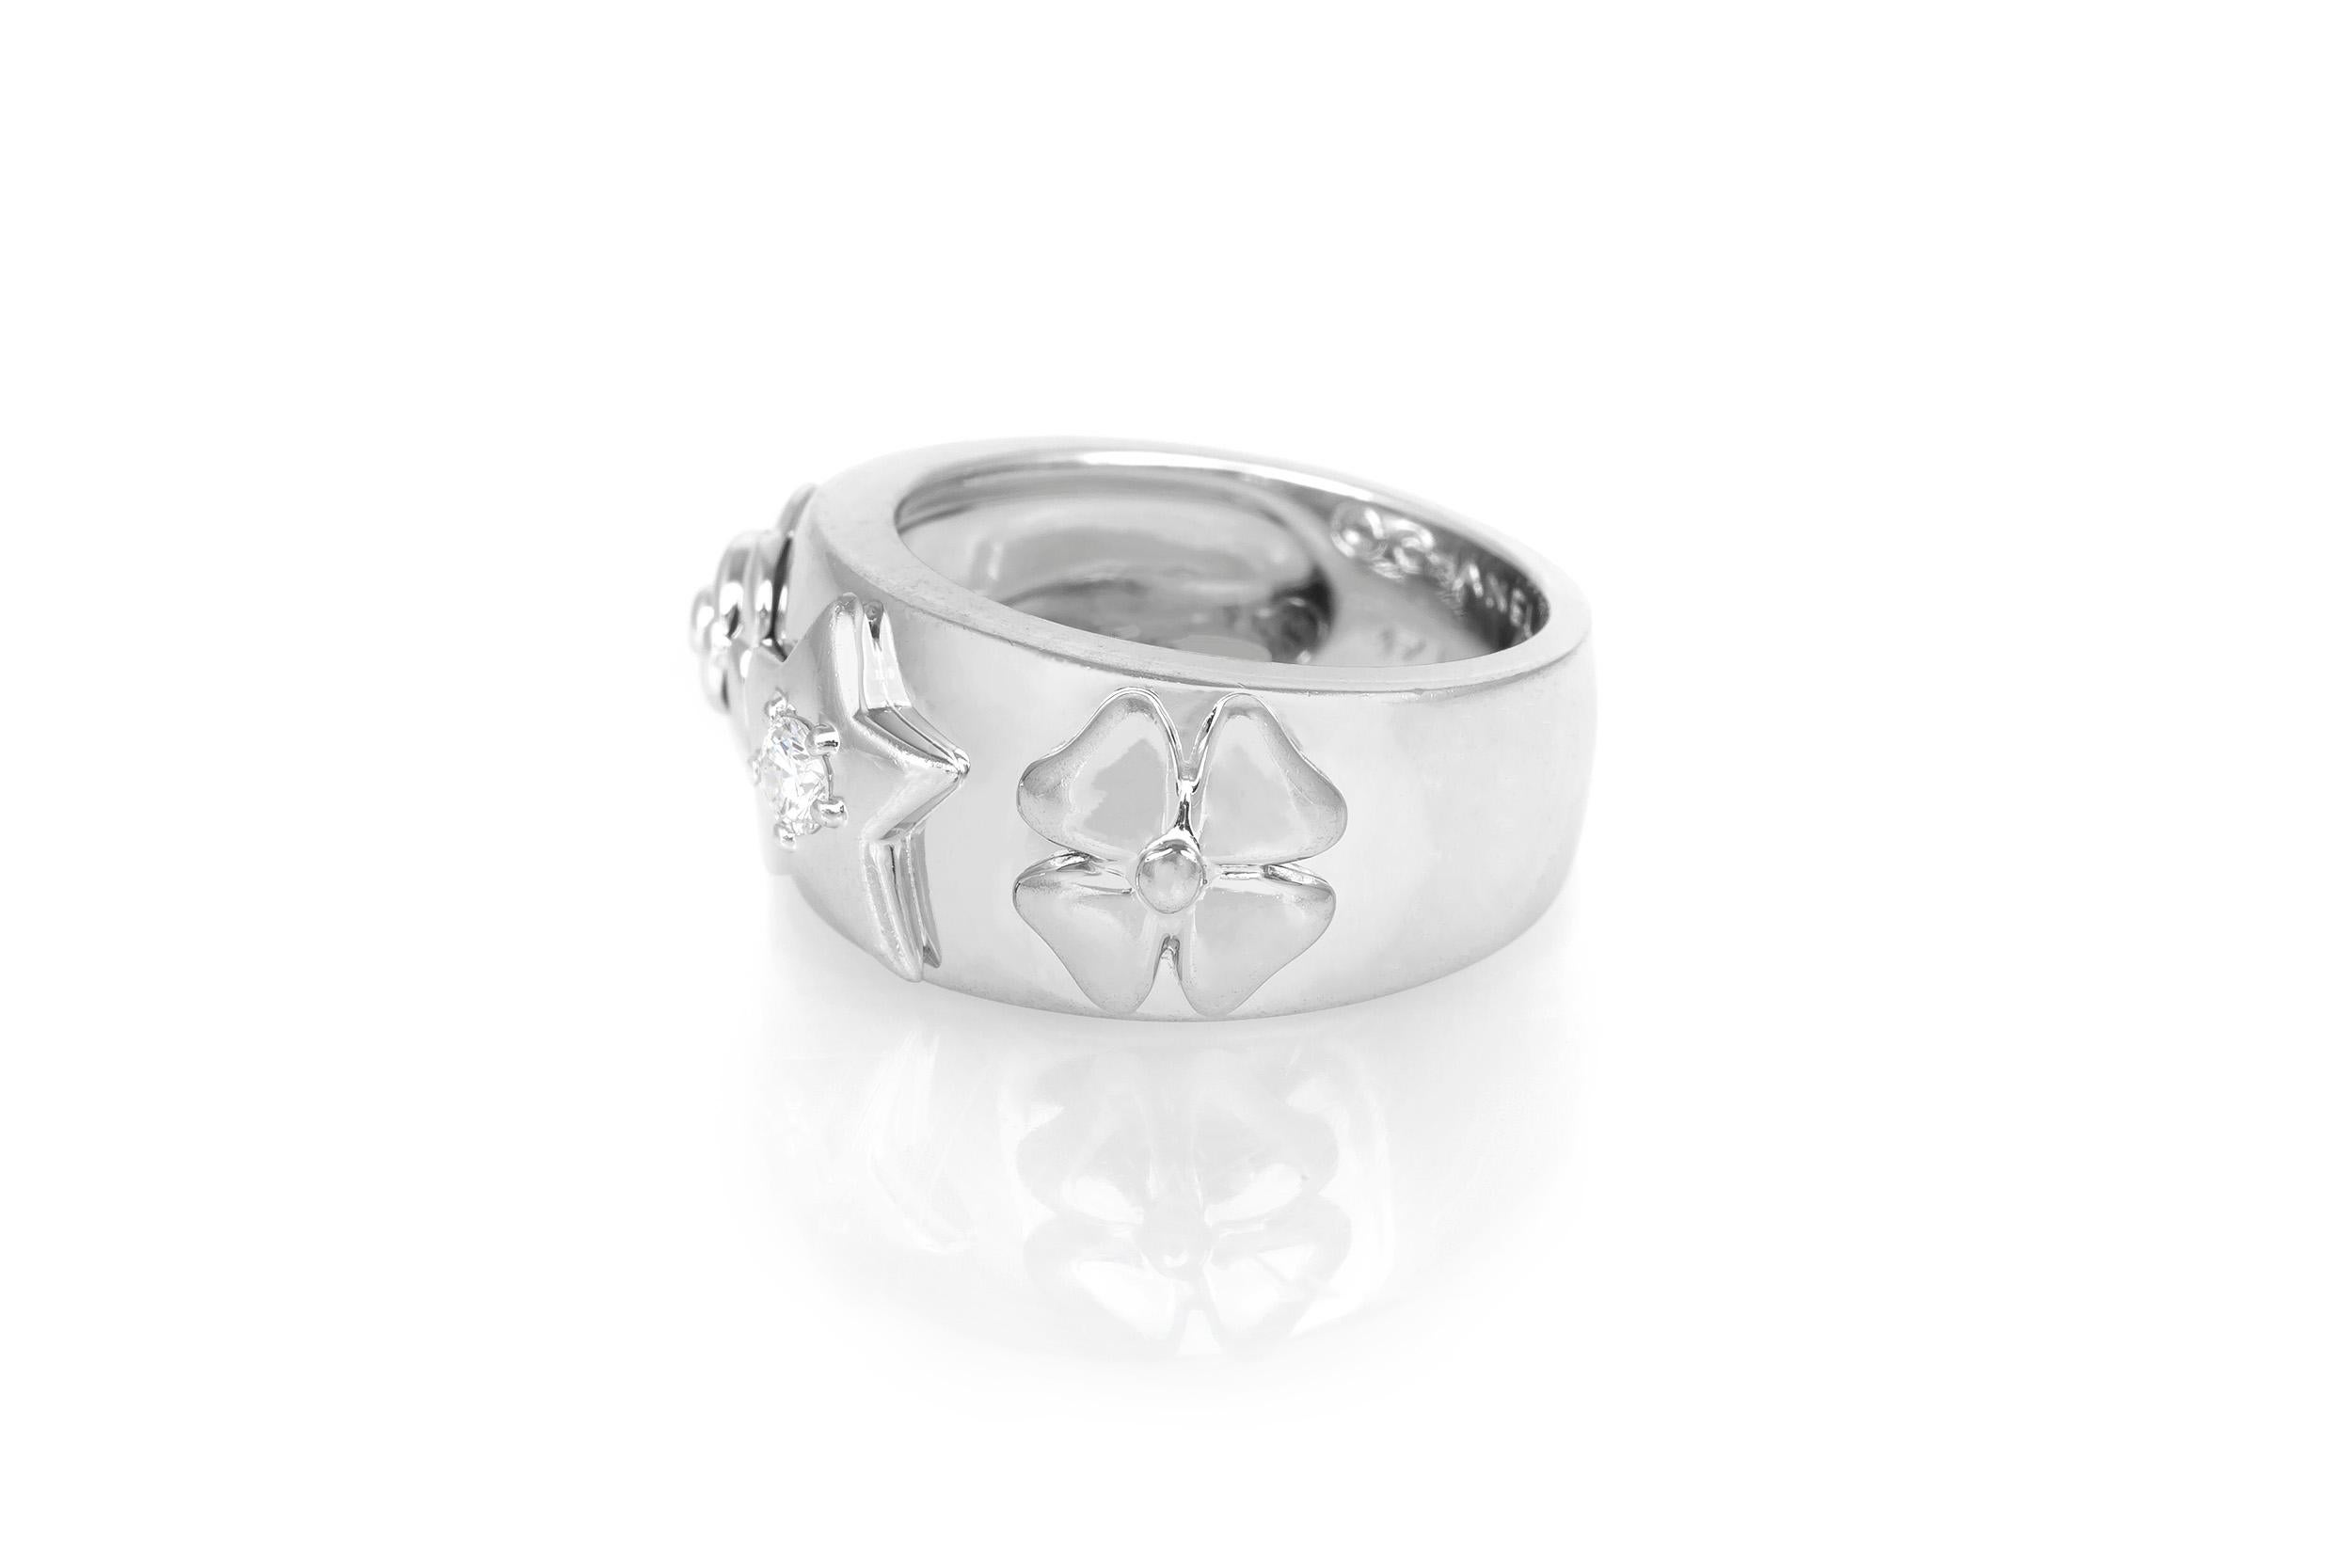 This vintage, 18K white gold Chanel ring features an embossed floral motif and a diamond-stud detail.
Ring size 5.5.